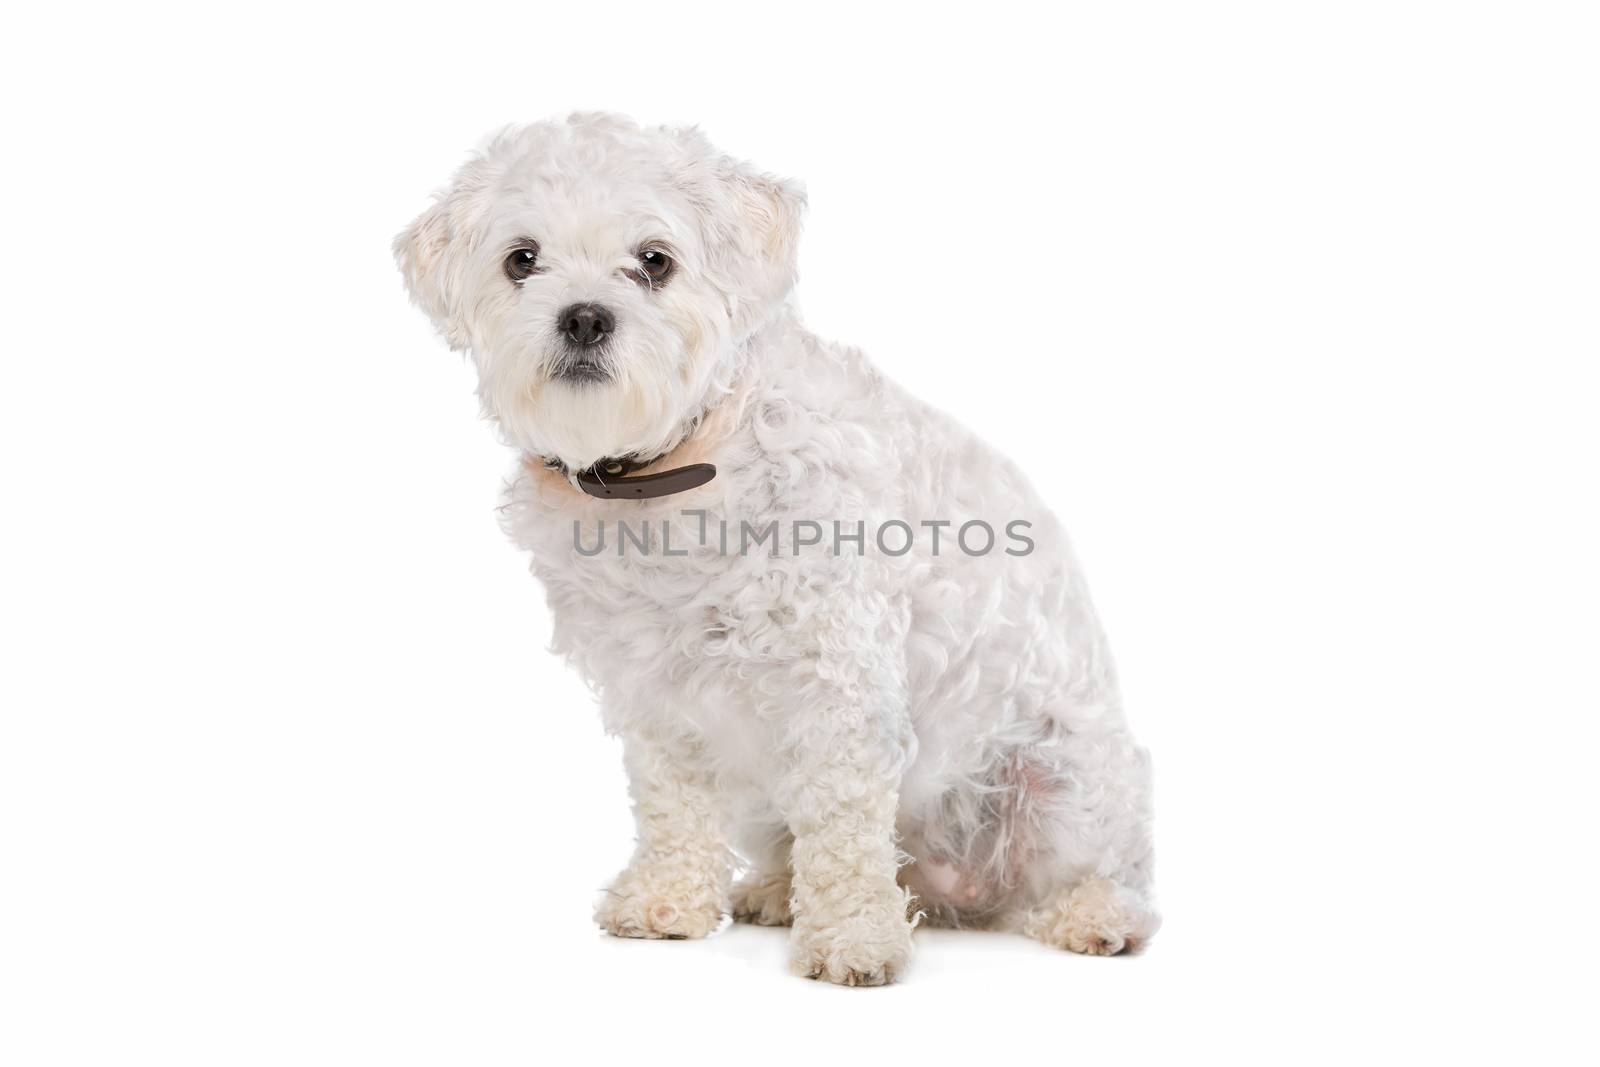 Mixed breed dog in front of a white background